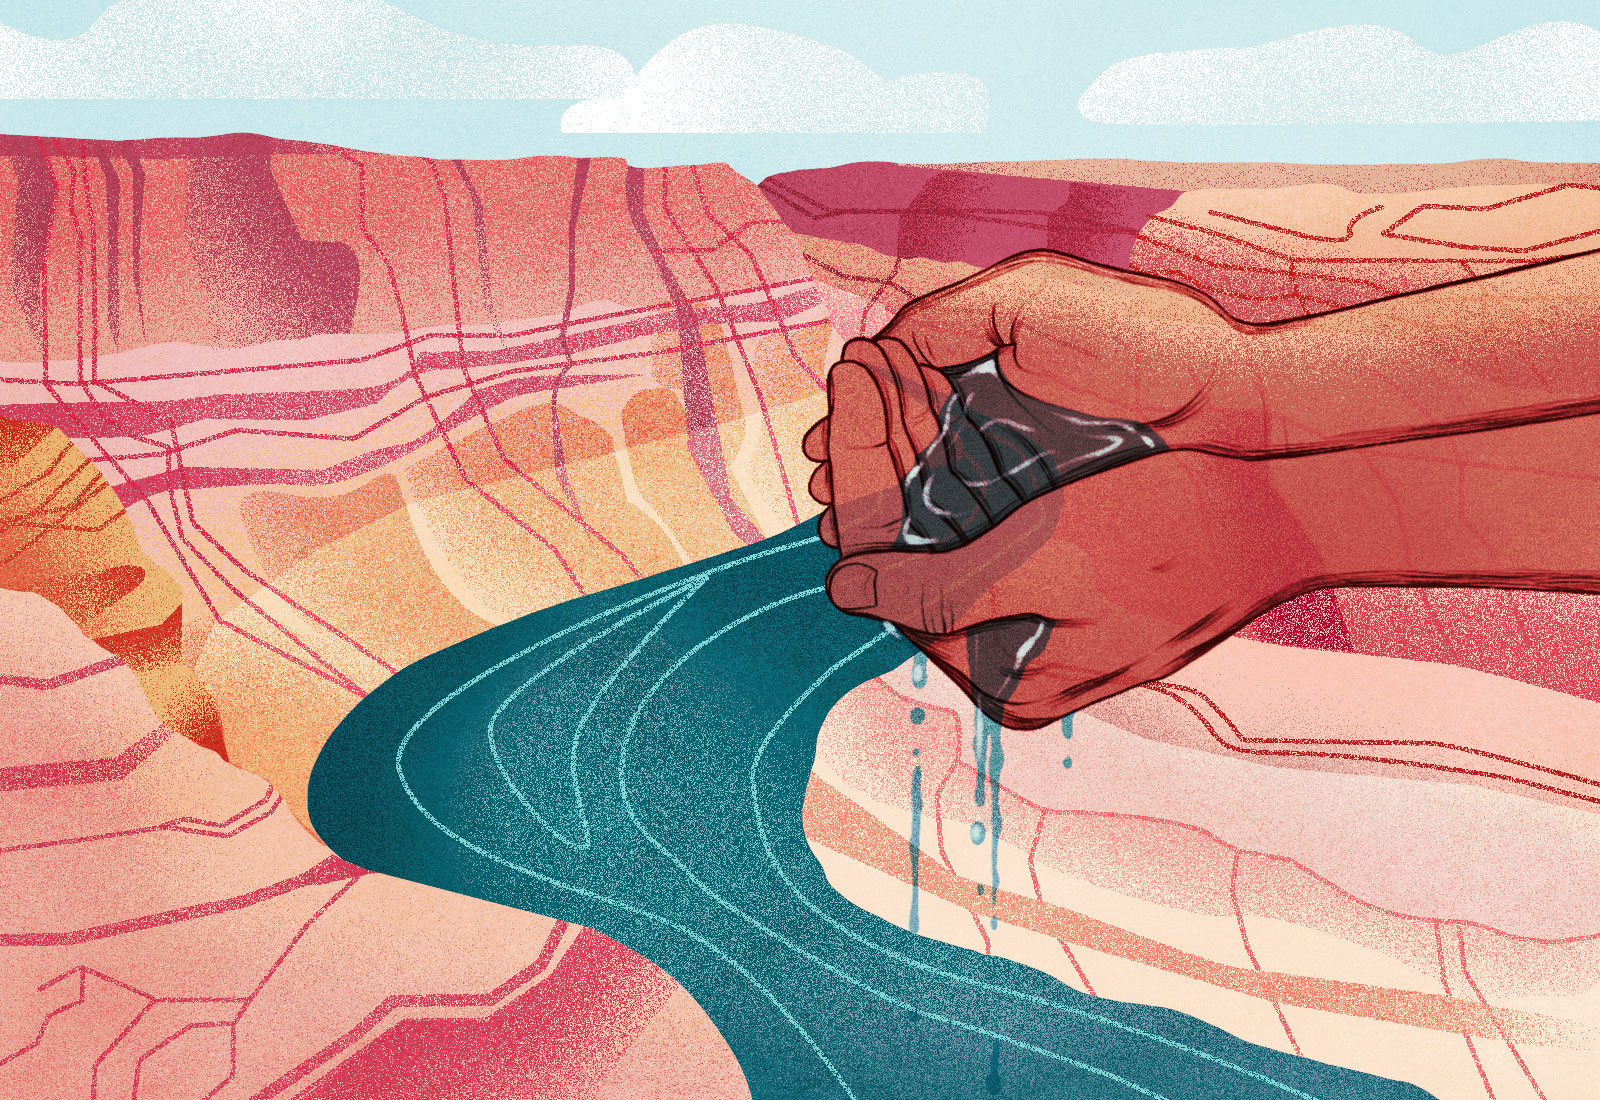 Illustration: Hands cupping water that drips into the Colorado River, cliffs in the background